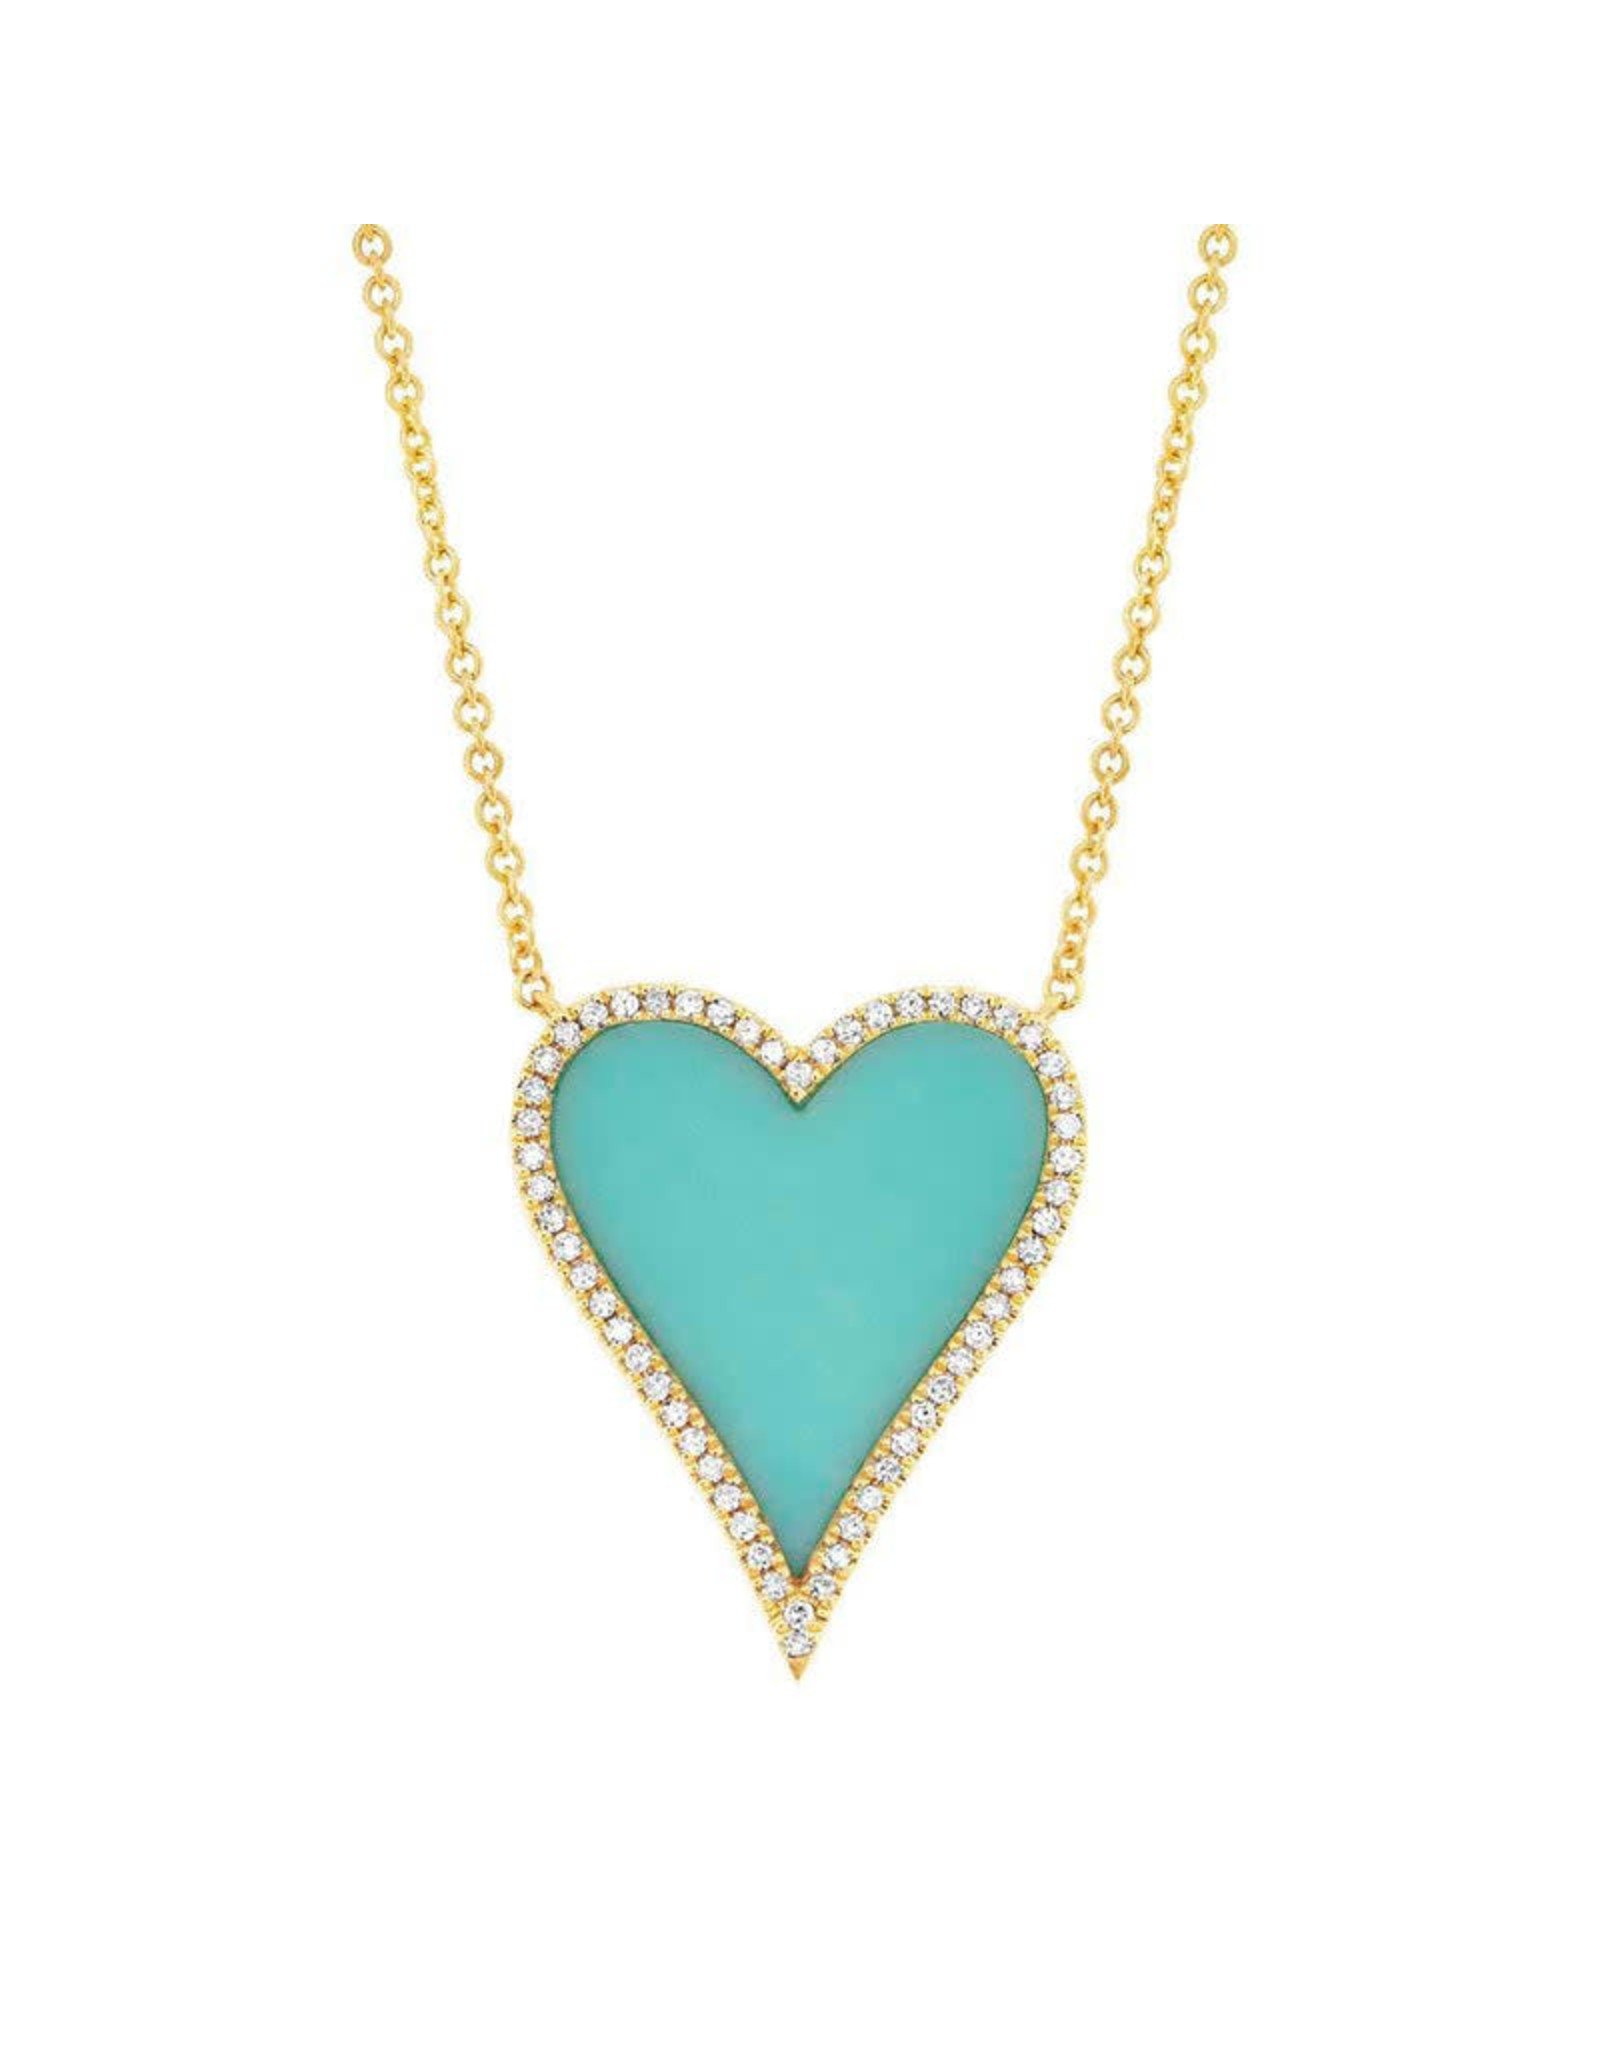 14K Yellow Gold Elongated Turquoise & Diamond Heart Necklace, TQ: 1.80ct, D: 0.13ct